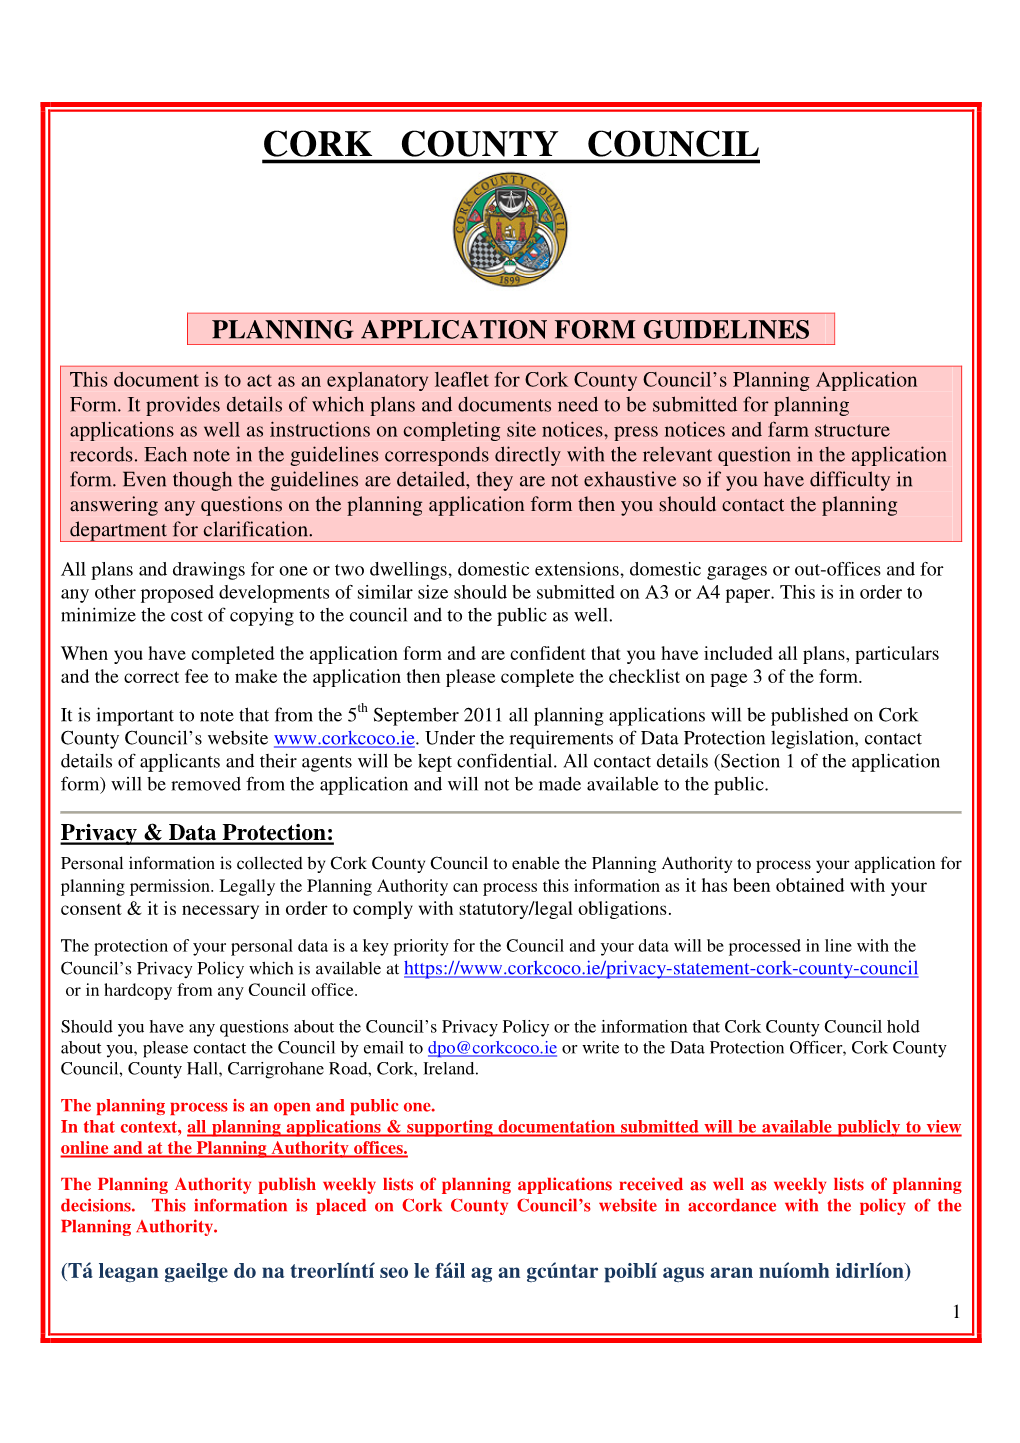 Planning Application Form Guidelines